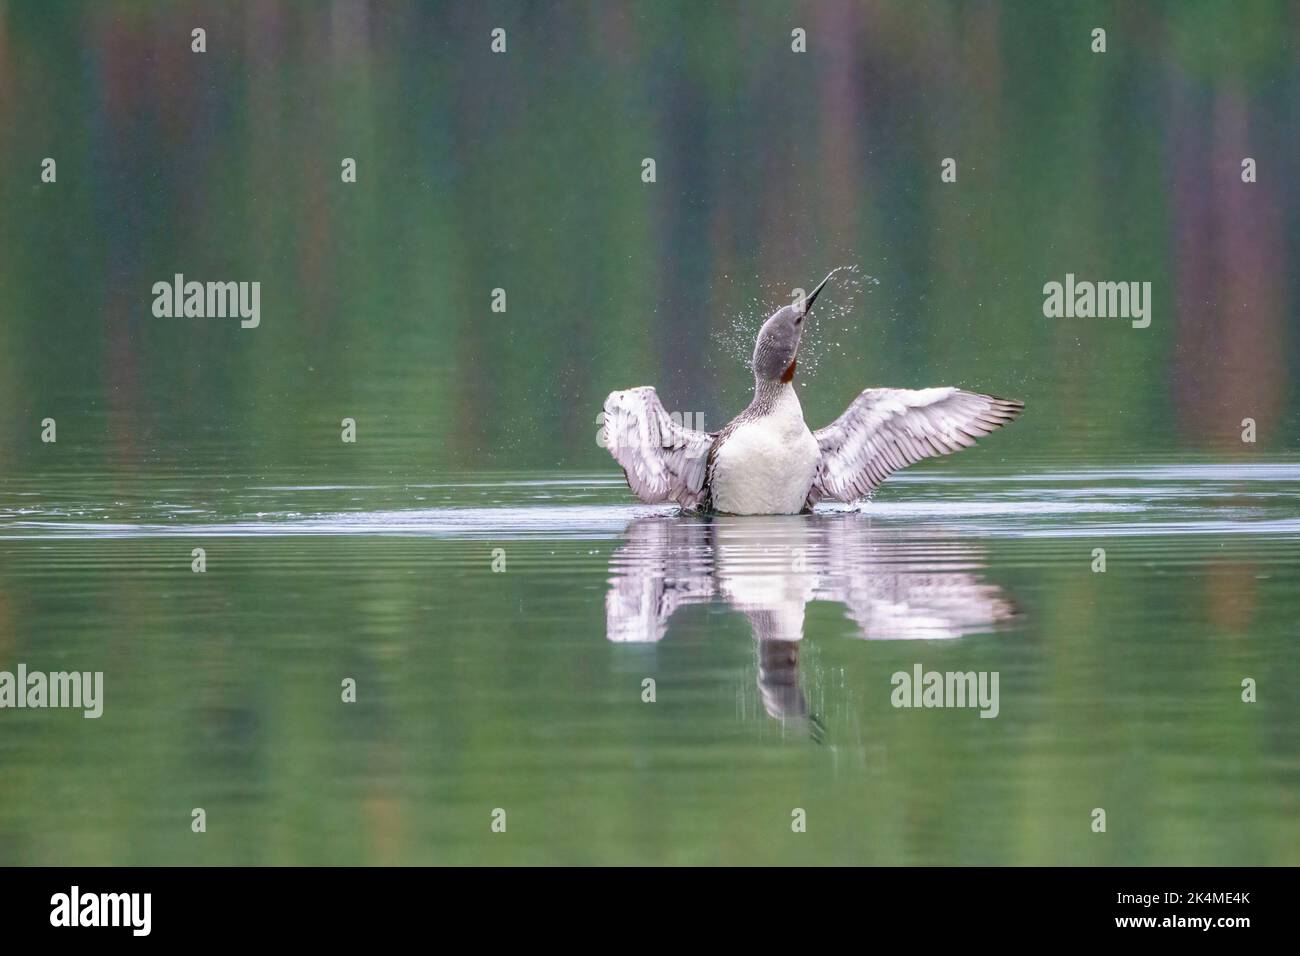 Red-throated loon, Gavia stellata swimming in lake flapping his wings, Jokkmokk county, Swedish Lapland, Sweden. Stock Photo